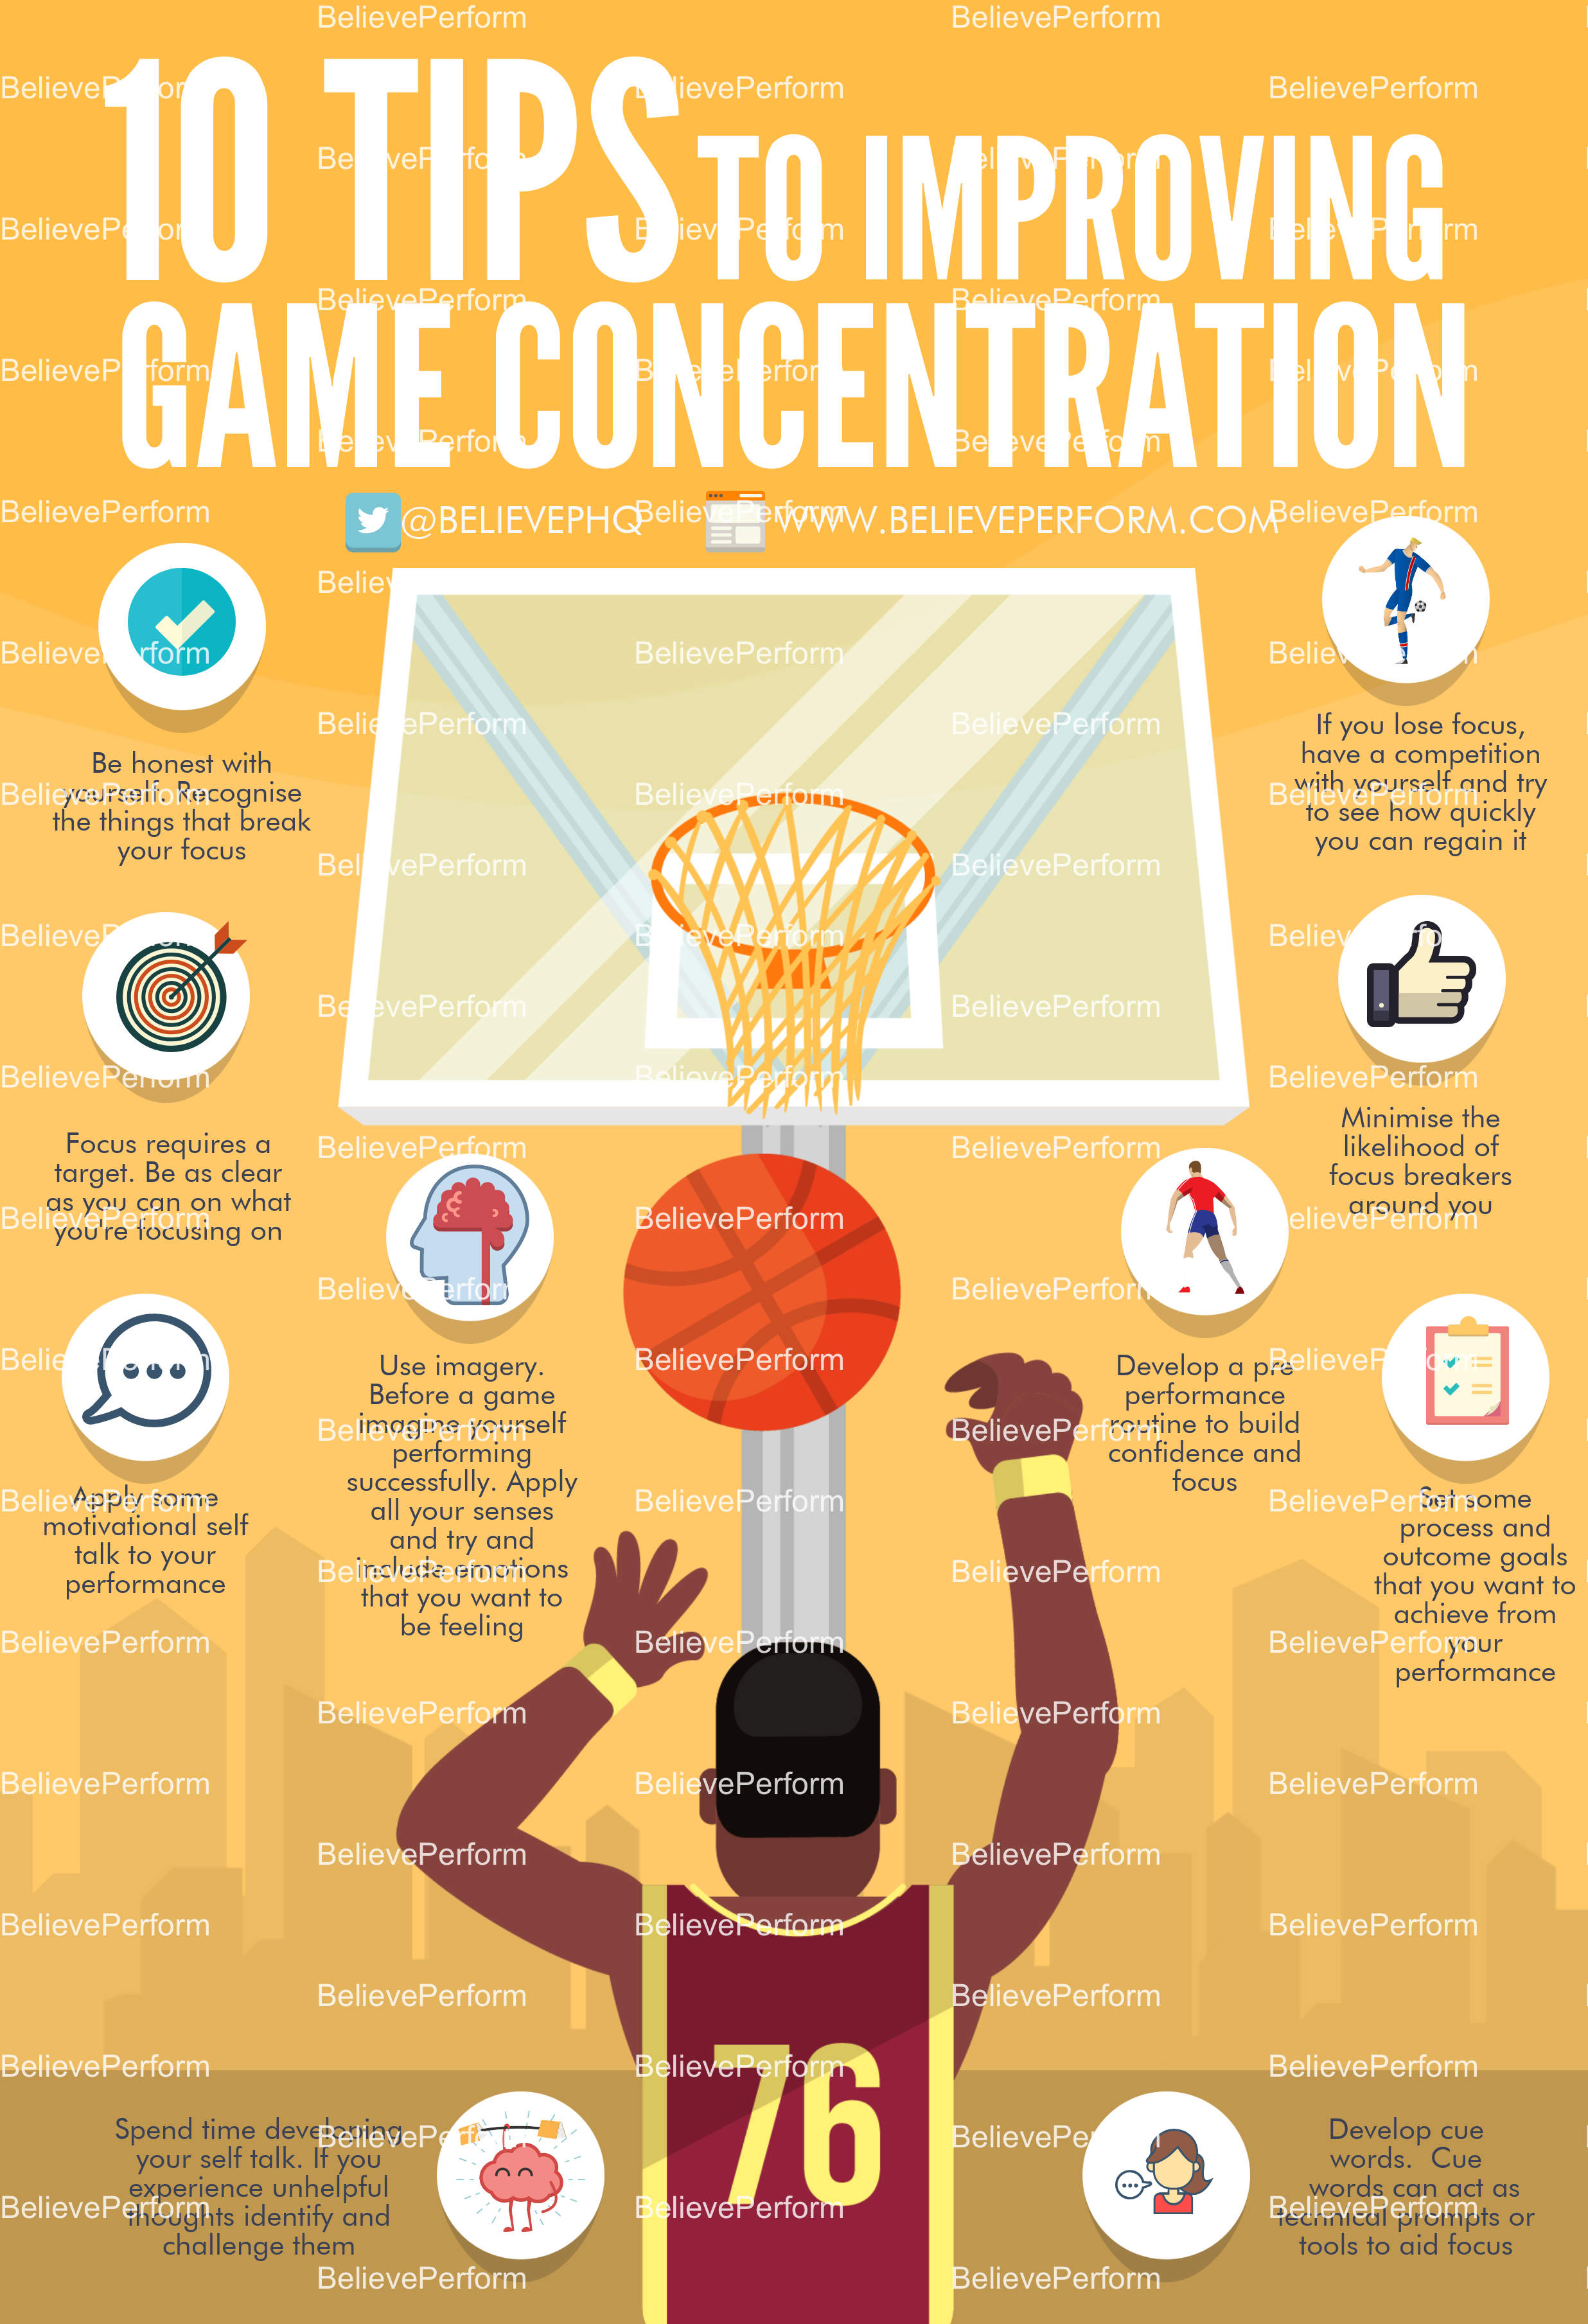 How to Improve Concentration: 5 Useful Tips to Get You Focused